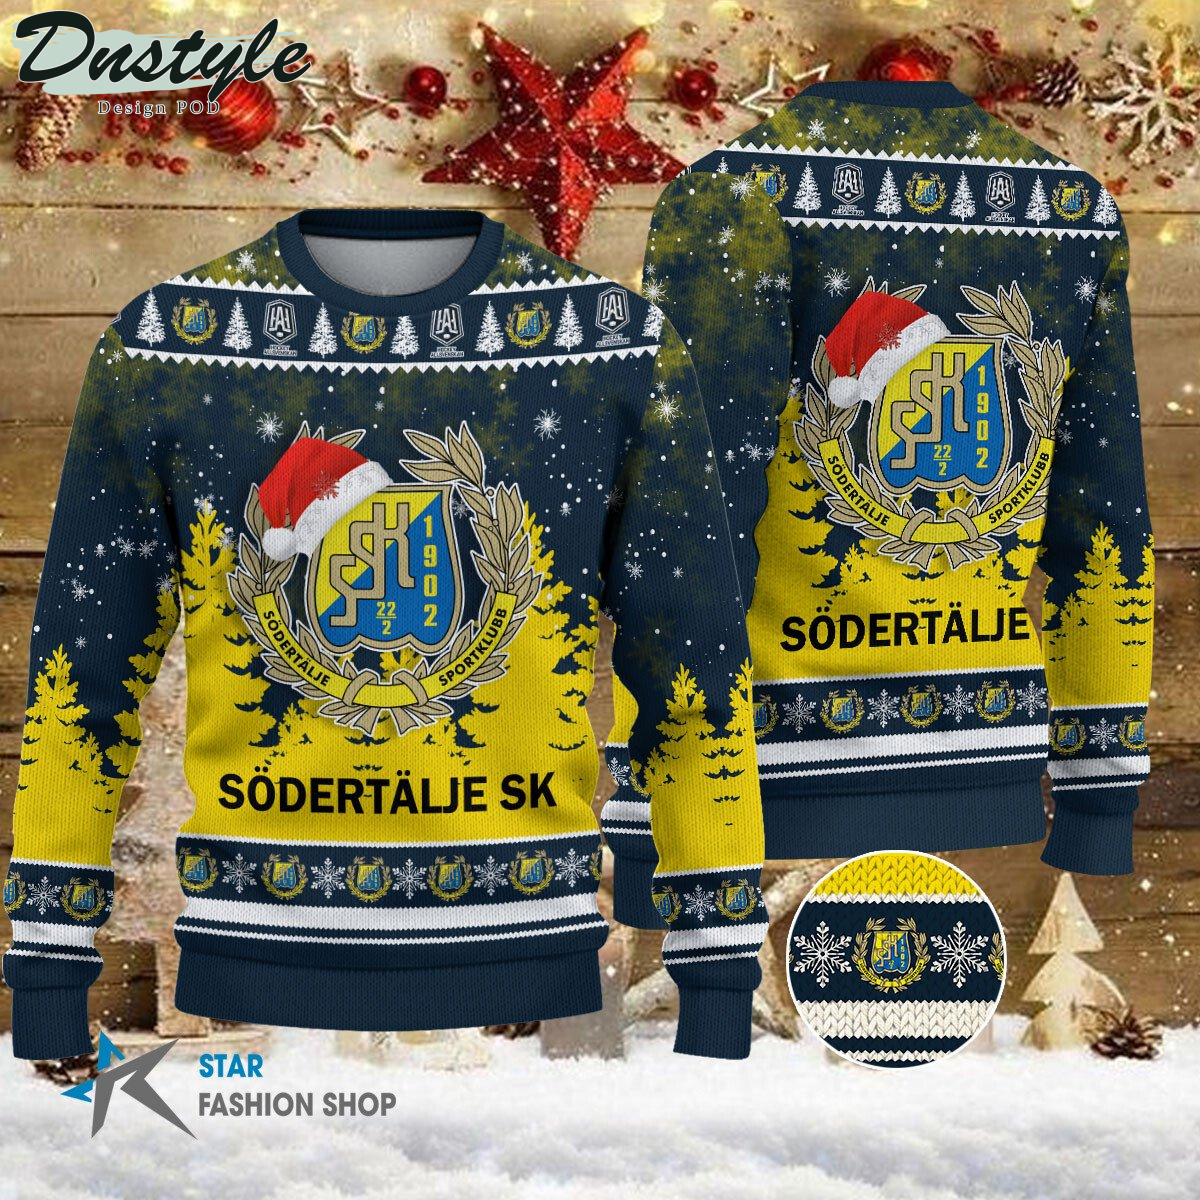 Vaxjo Lakers ugly christmas sweater